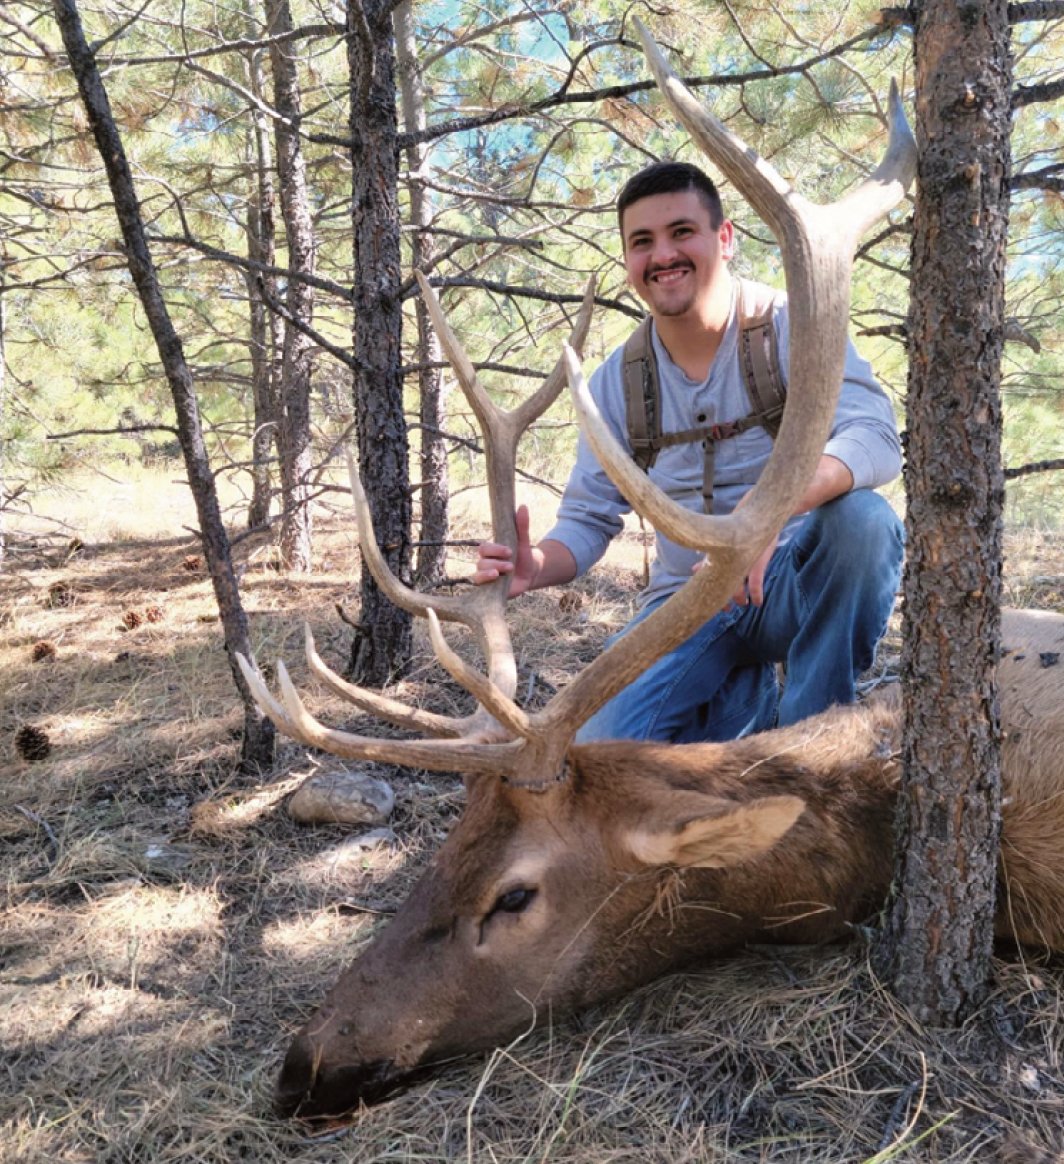 Hunter Luke of Kemper County harvested a 275-pound Elk on Sept. 19, 2021 on a hunting trip to Montana.